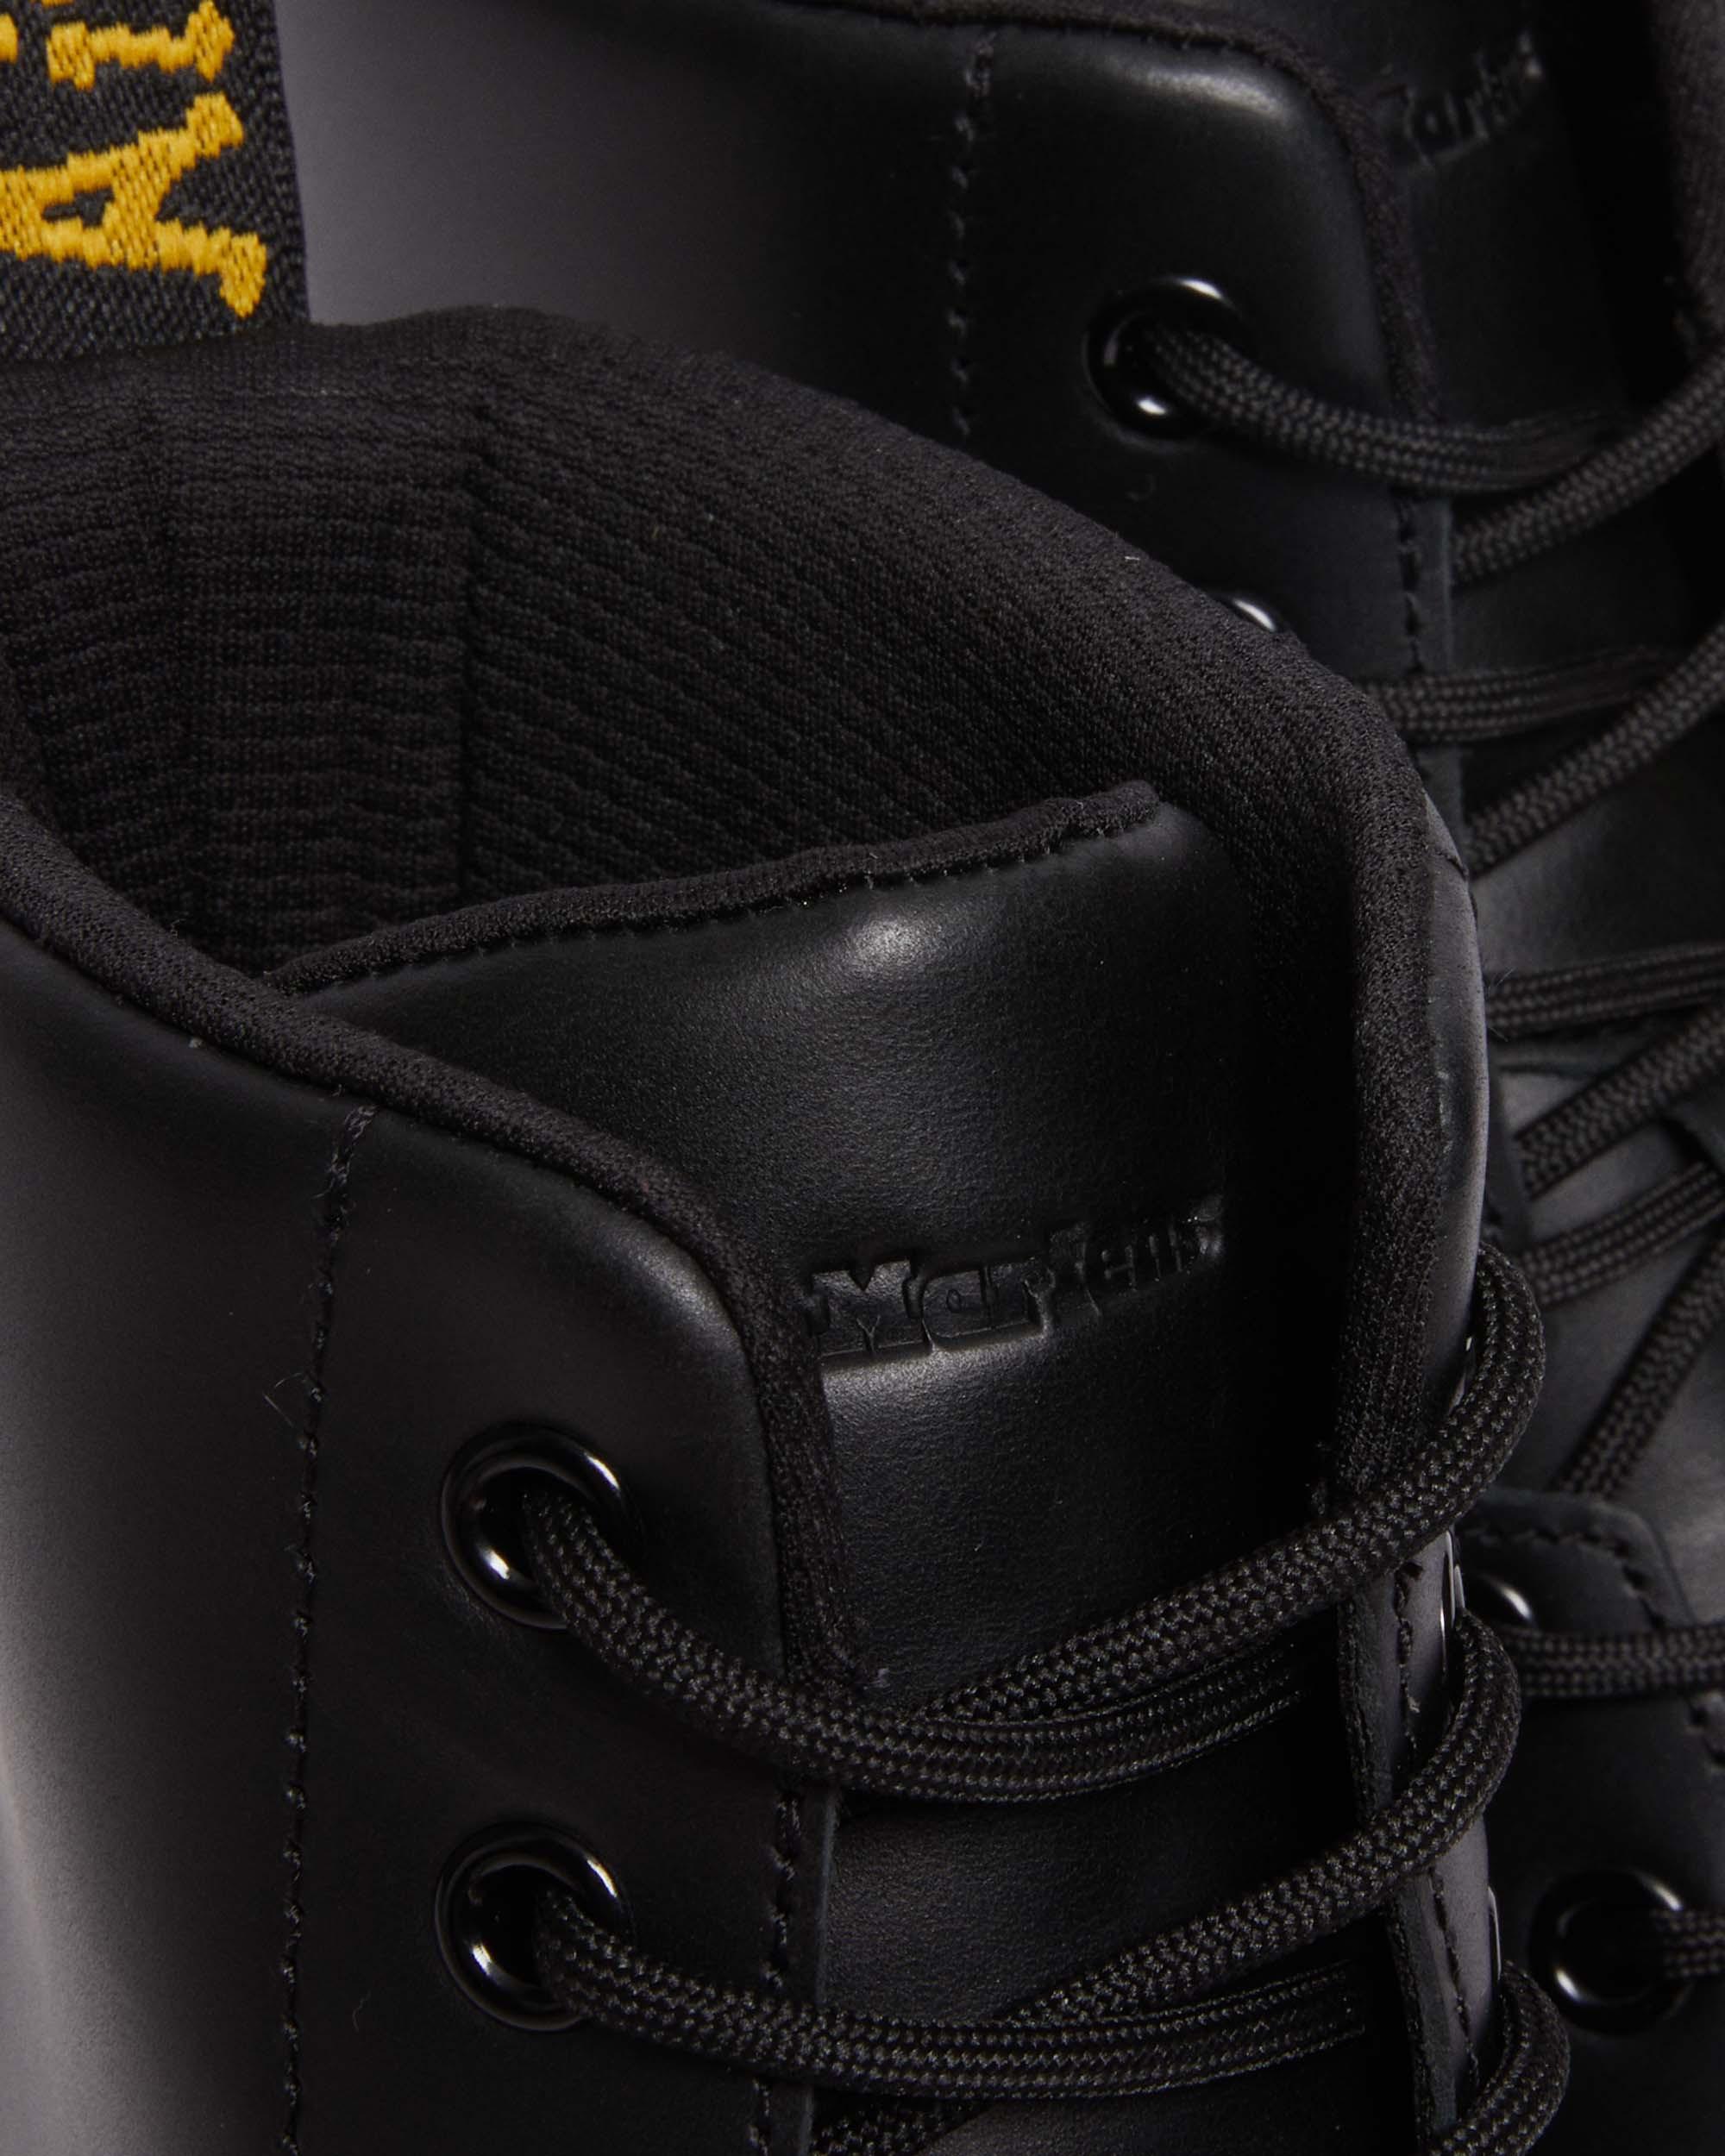 Crewson Leather Lace Up Boots in Black | Dr. Martens